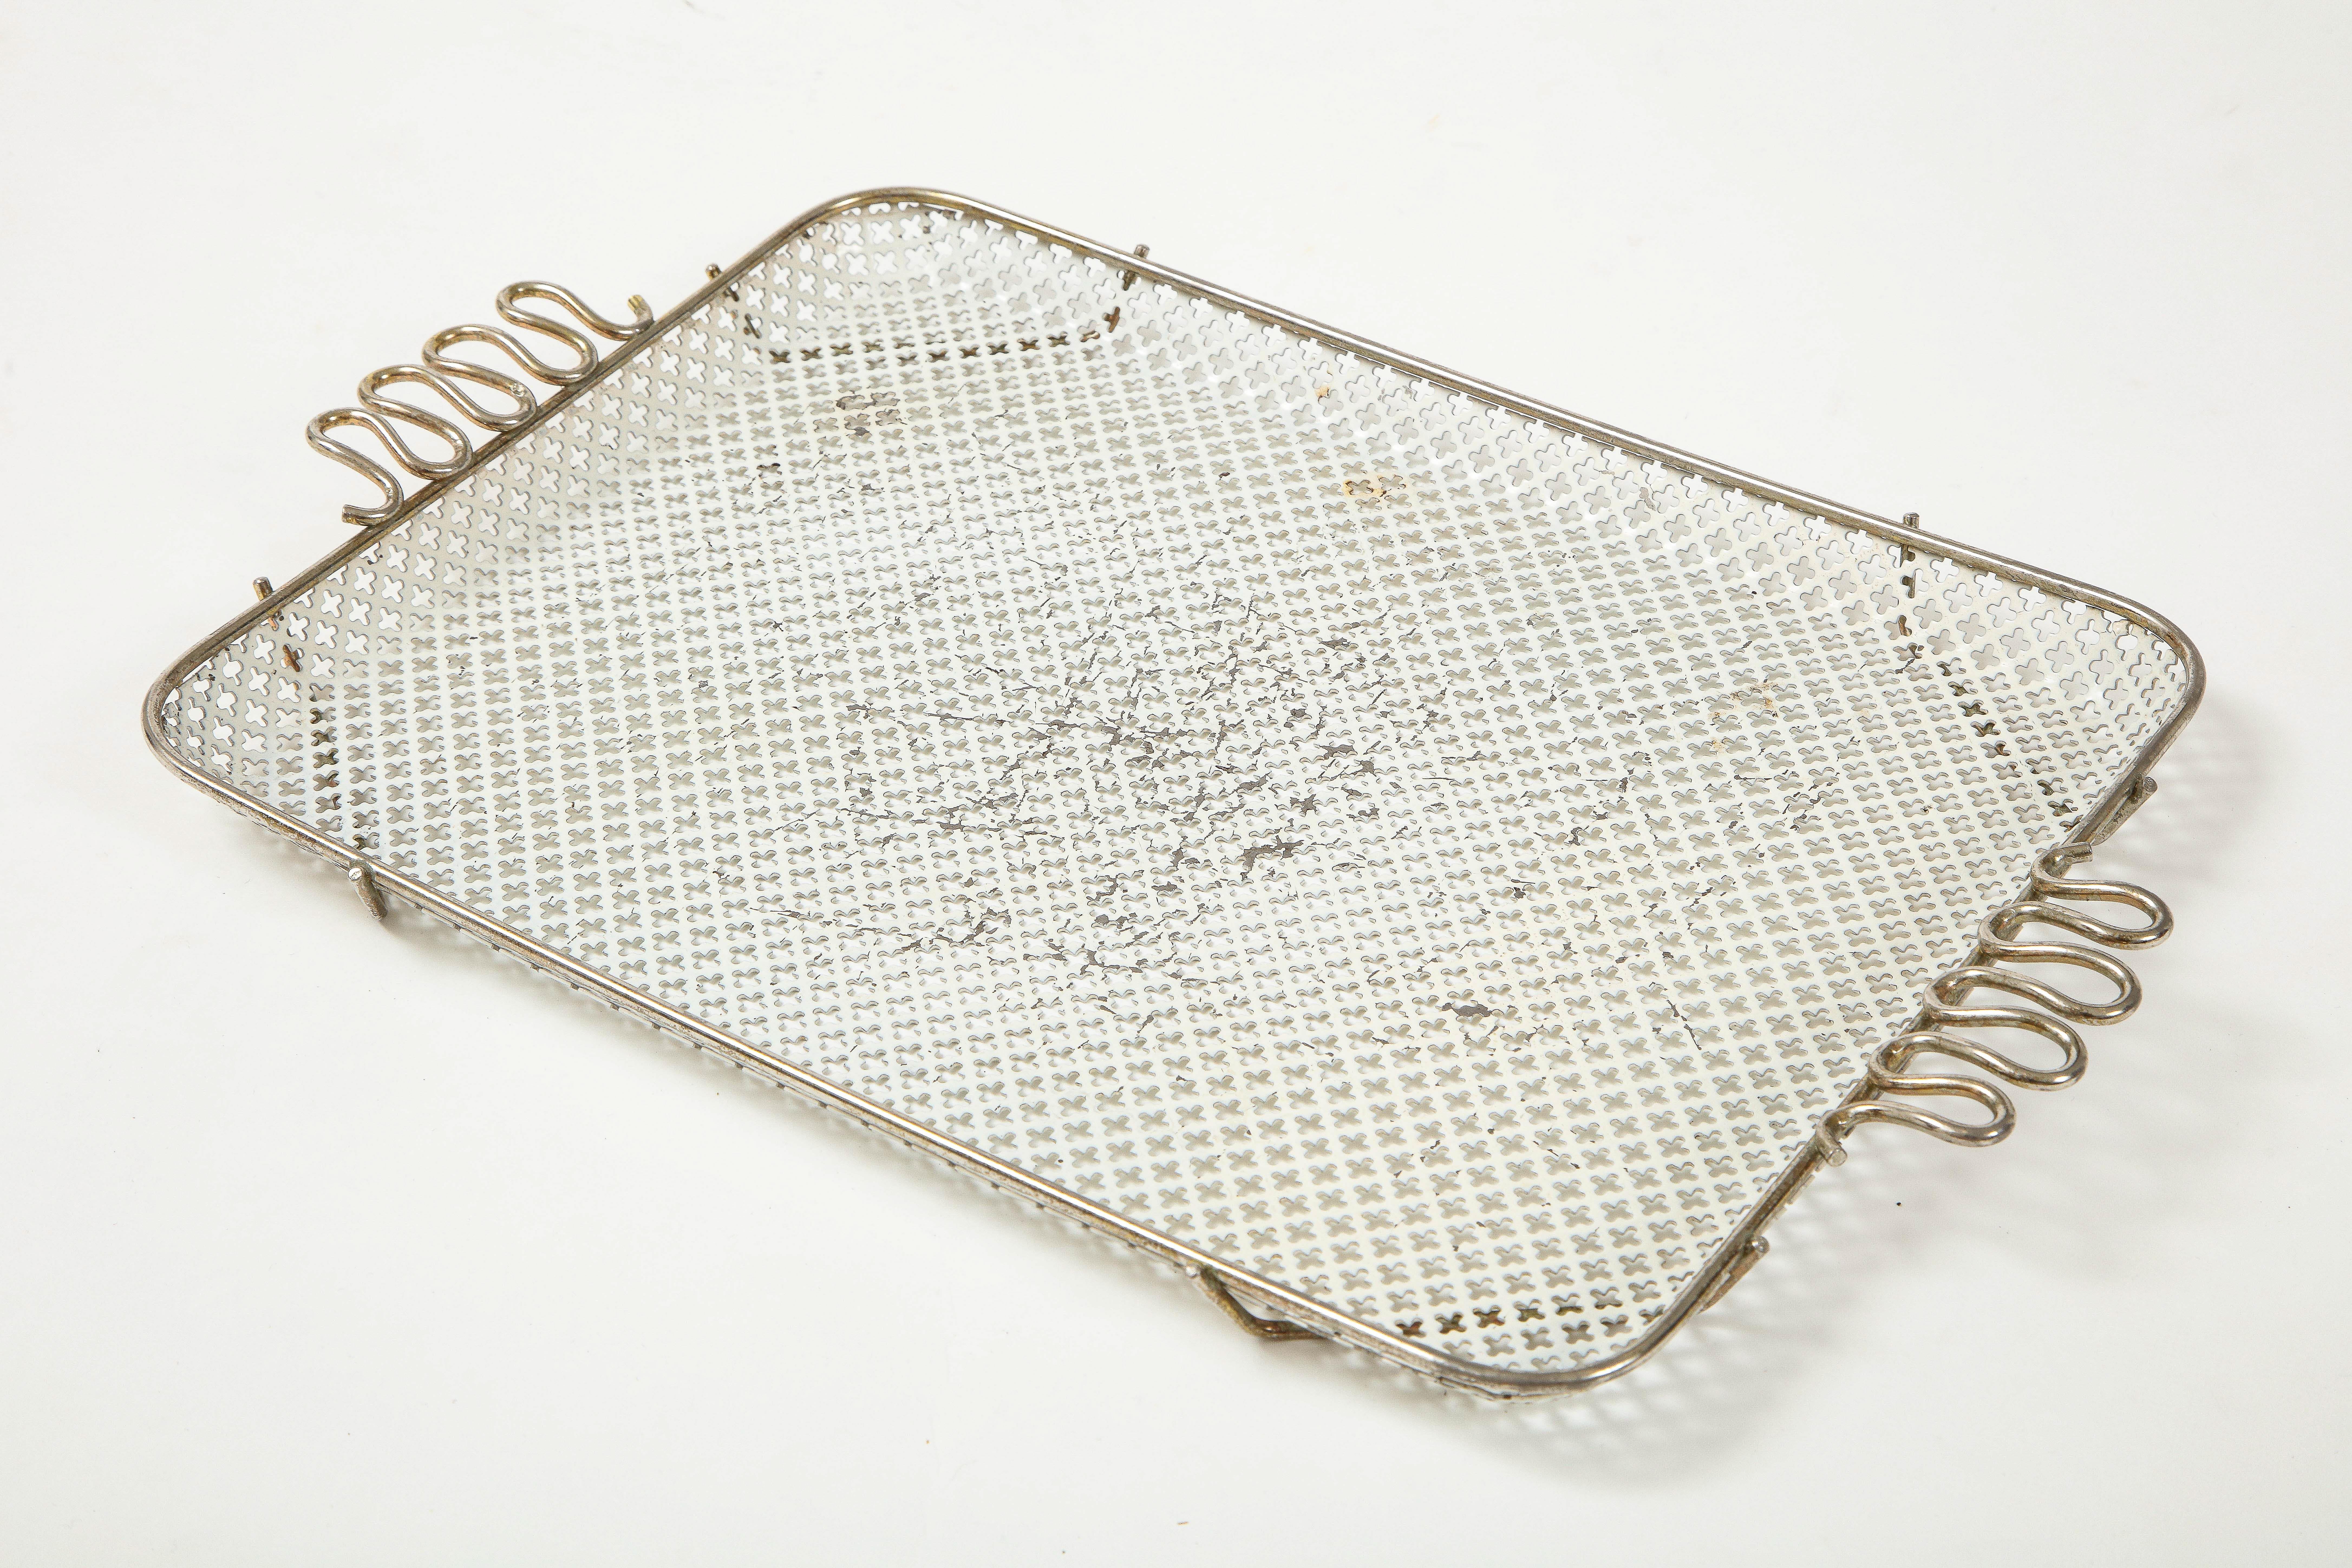 French Modernist perforated tray with metal banding around perimeter and sinuous handles. Worn center. We will leave it to you to decide whether to repaint.